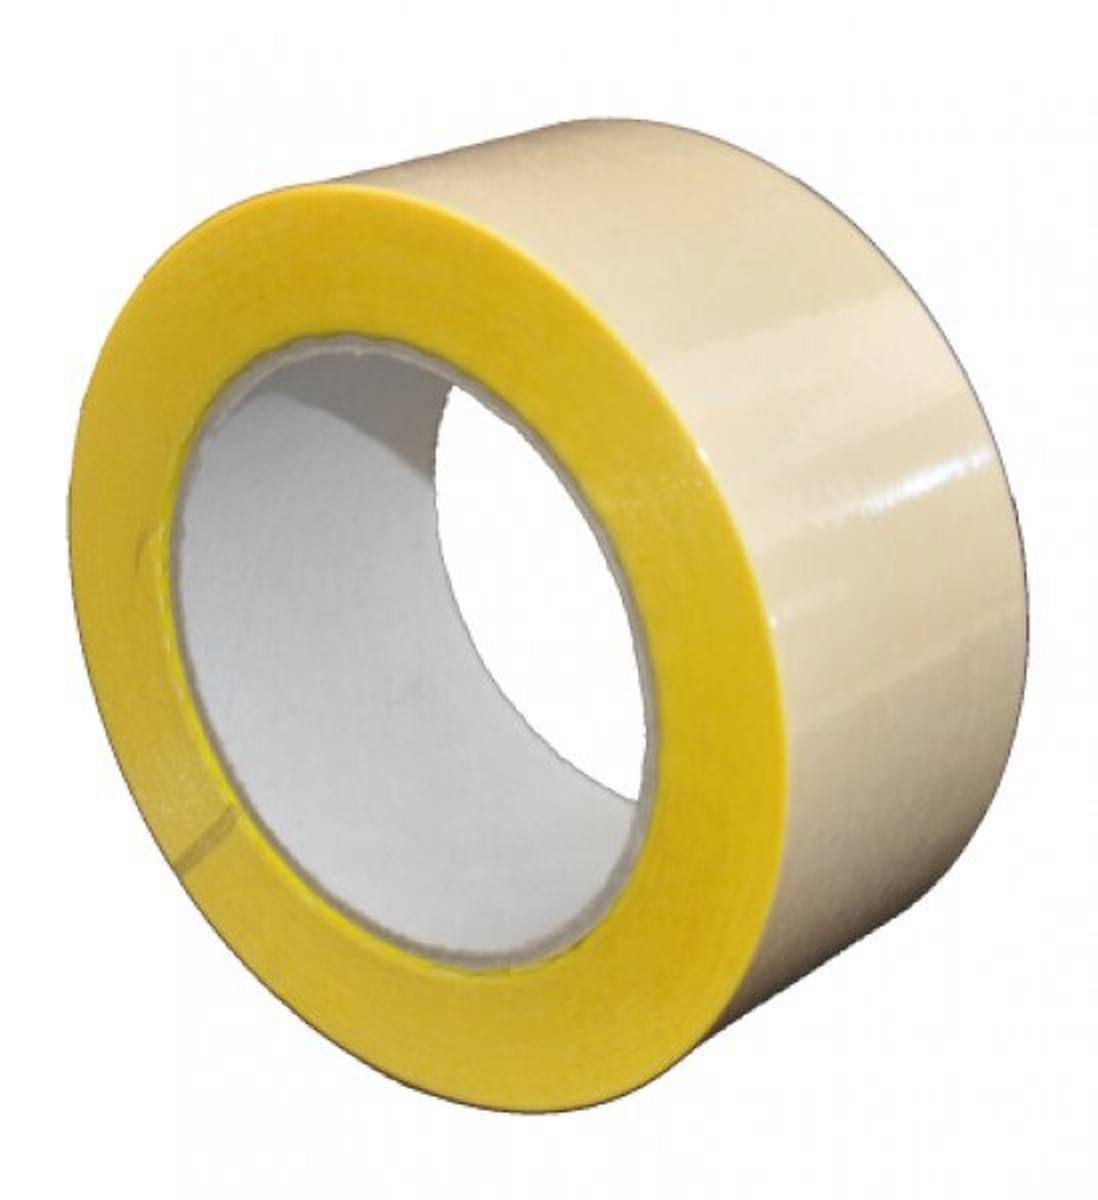 S-K-S 407 Double-sided adhesive tape with polypropylene backing, high / low tack, yellow, 400 mm x 50 m, 0.15 mm